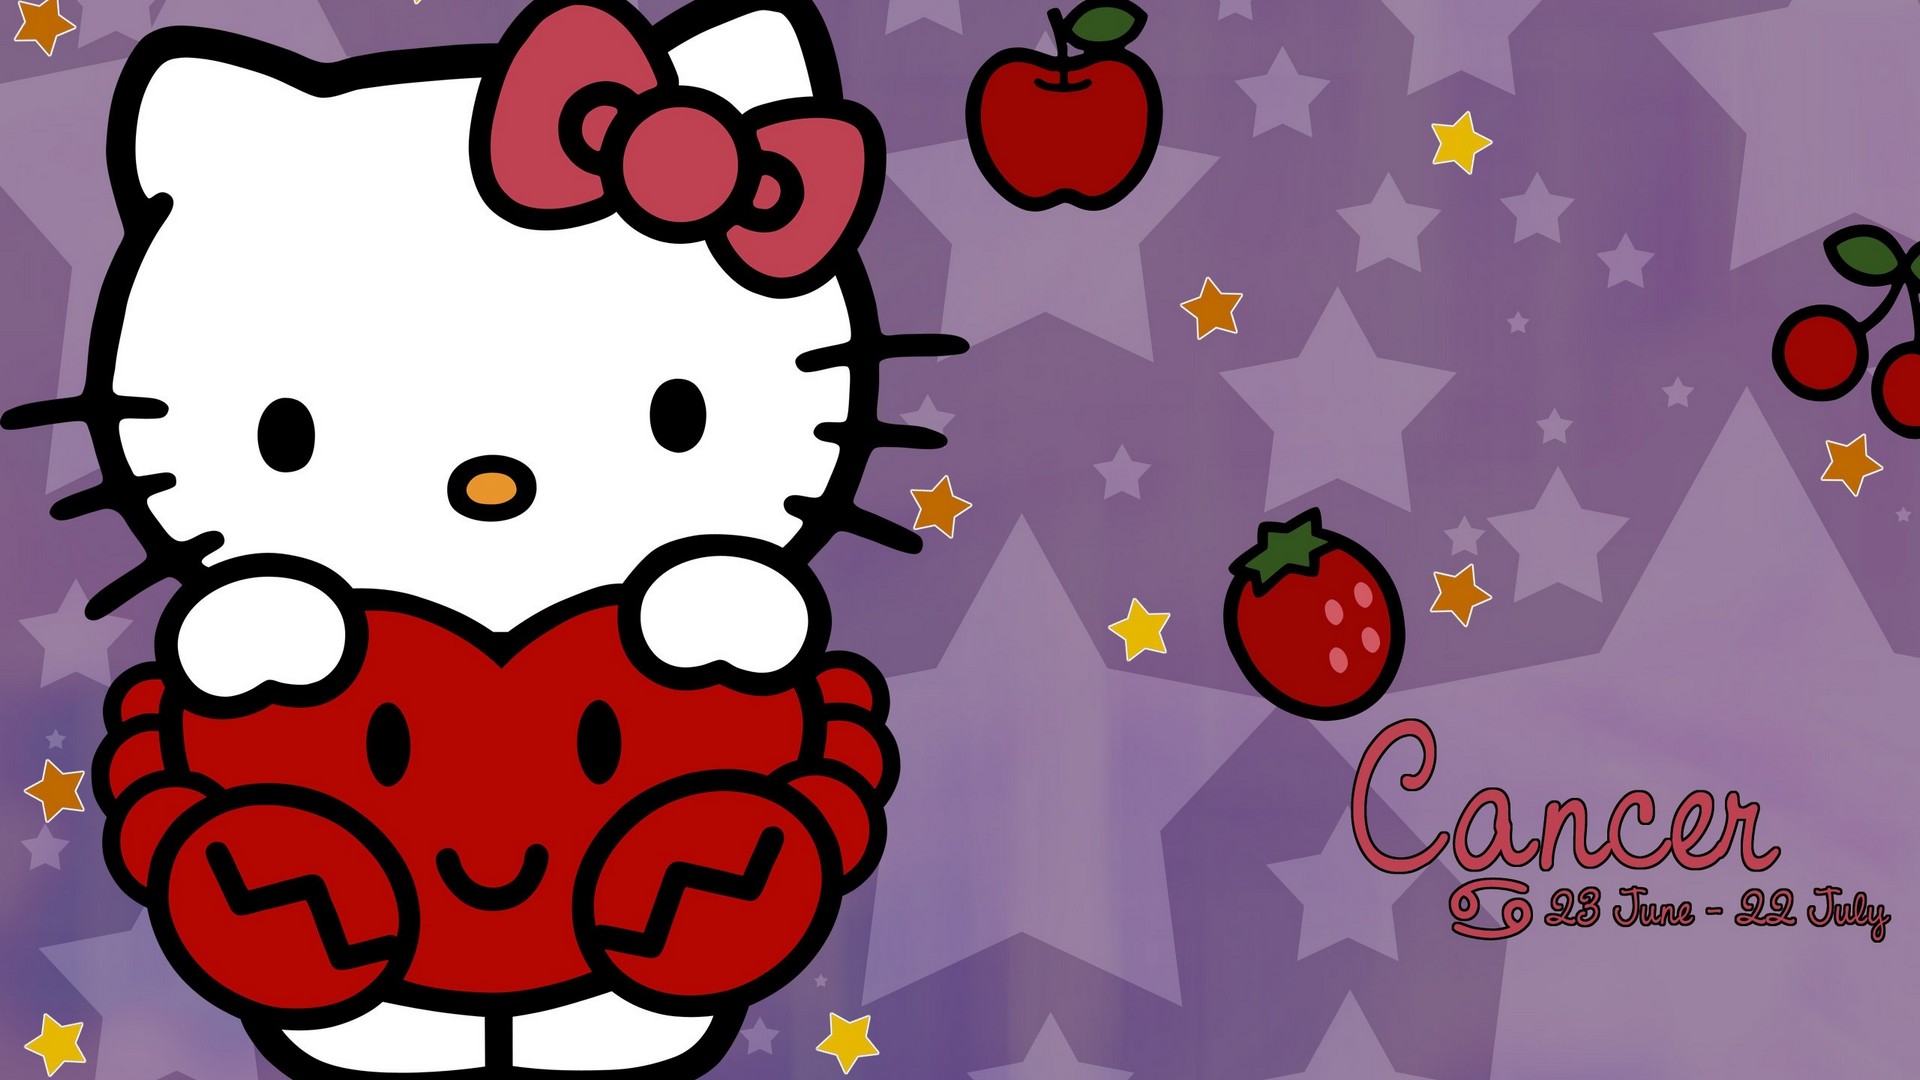 Hello Kitty Characters Wallpaper with image resolution 1920x1080 pixel. You can use this wallpaper as background for your desktop Computer Screensavers, Android or iPhone smartphones